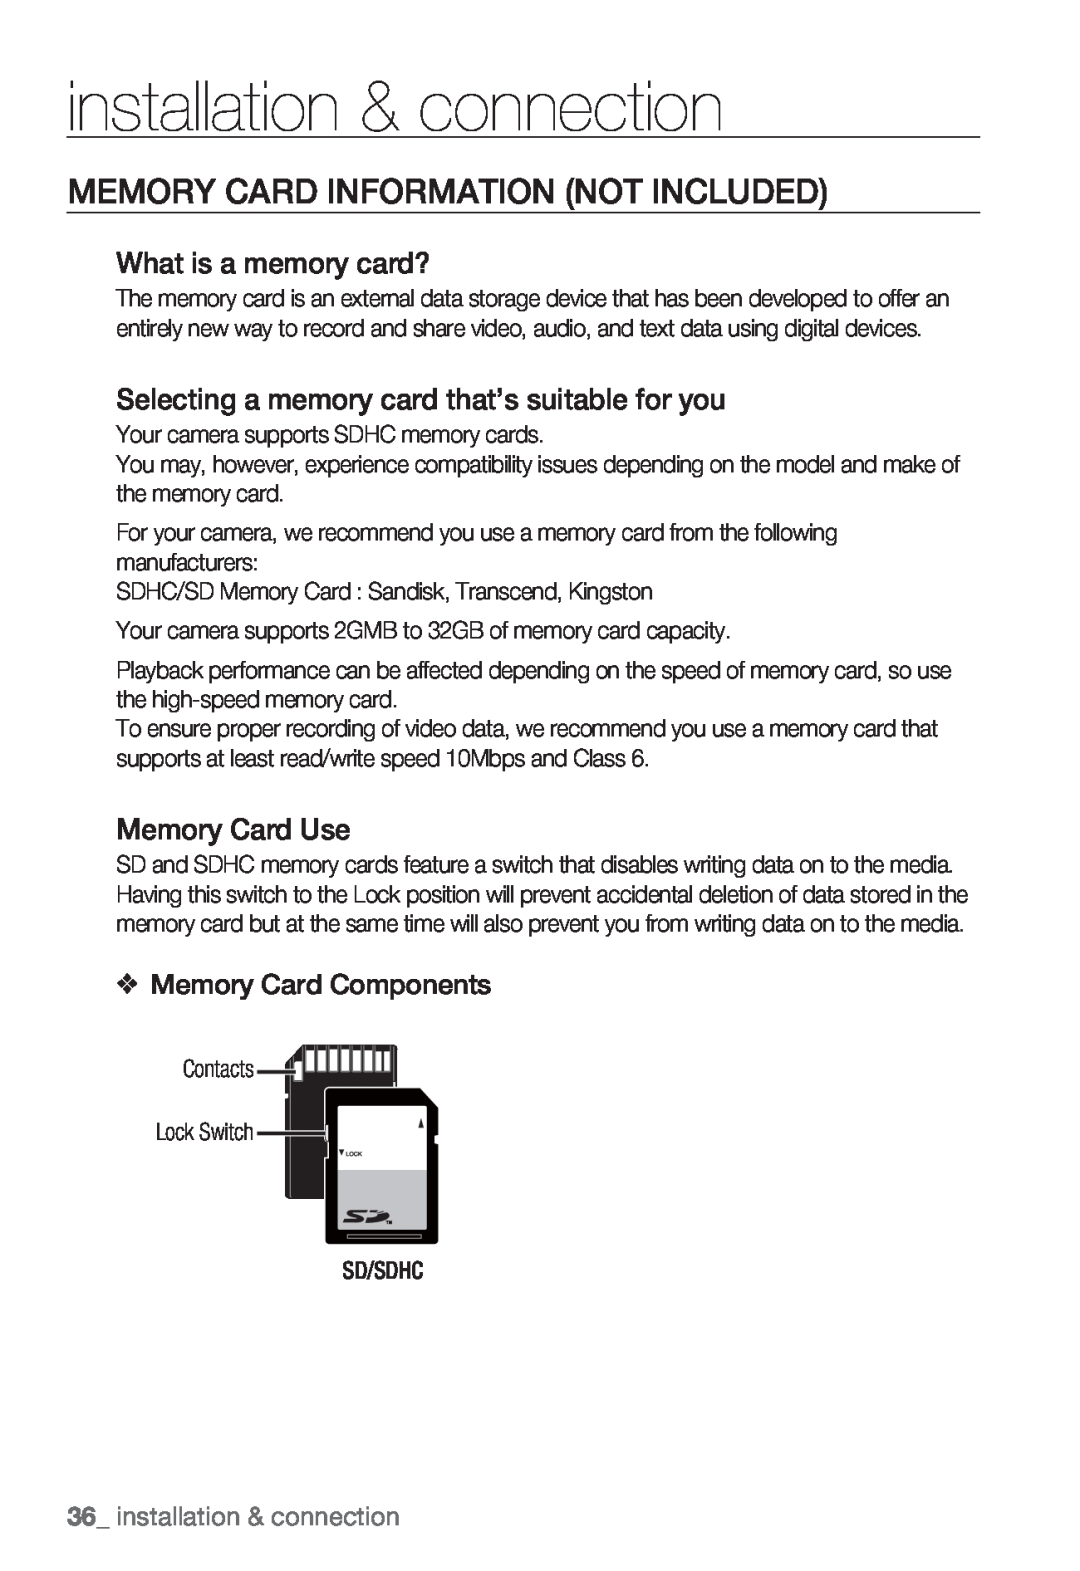 Samsung SND-5080 Memory Card Information Not Included, installation & connection, What is a memory card?, Memory Card Use 